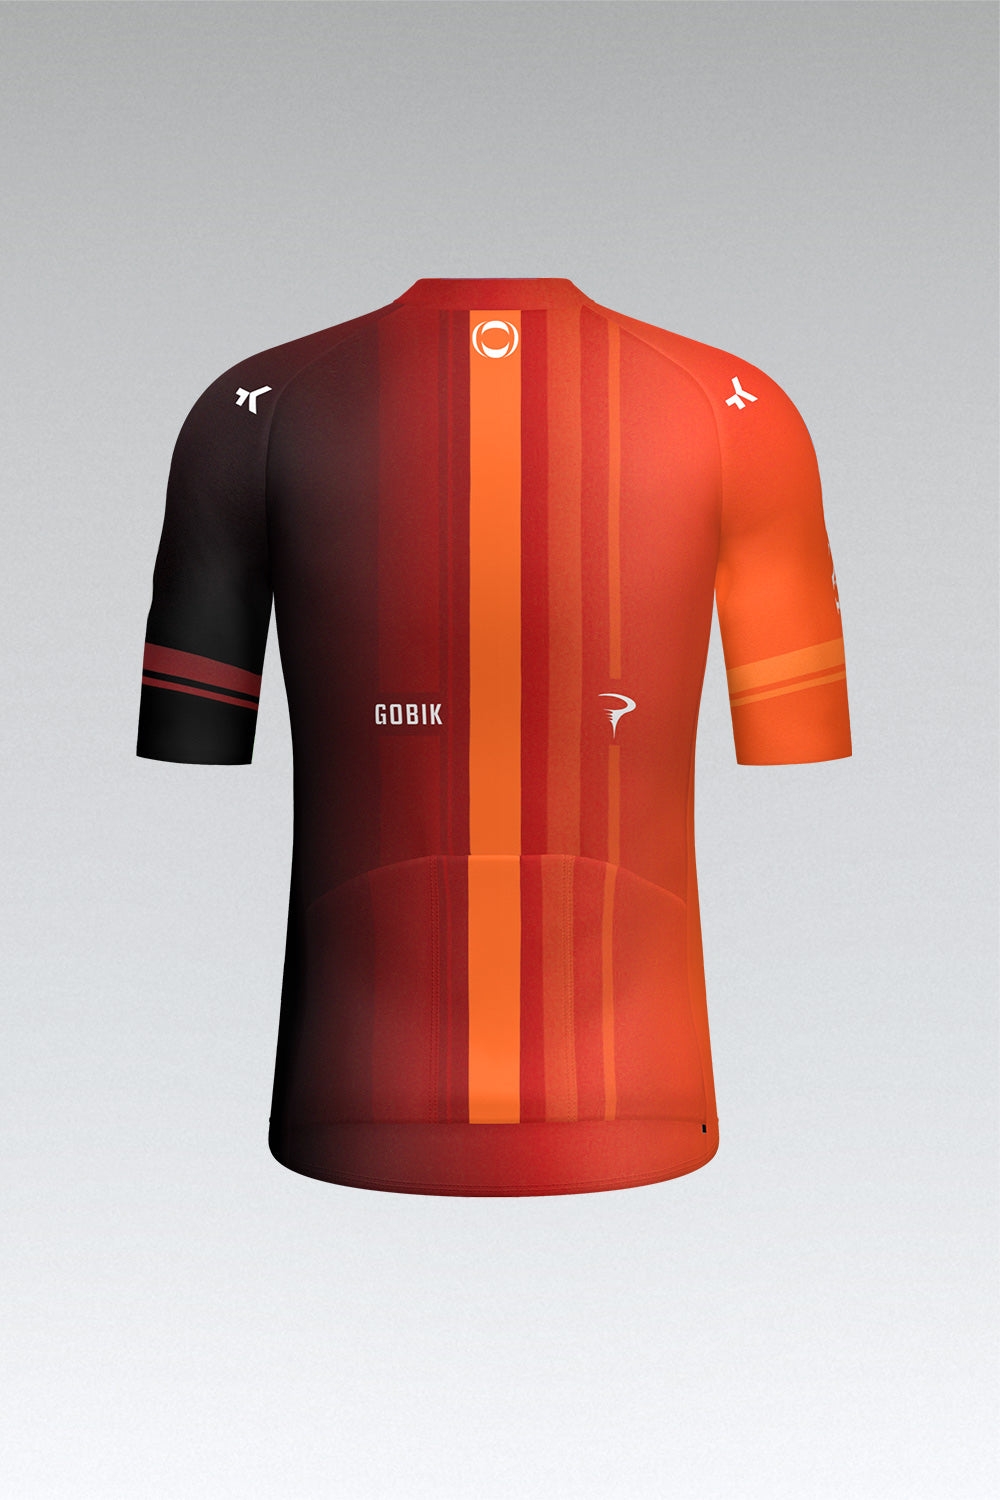 MAILLOT À MANCHES COURTES ODYSSEY UNISEX INEOS GRENADIERS 24